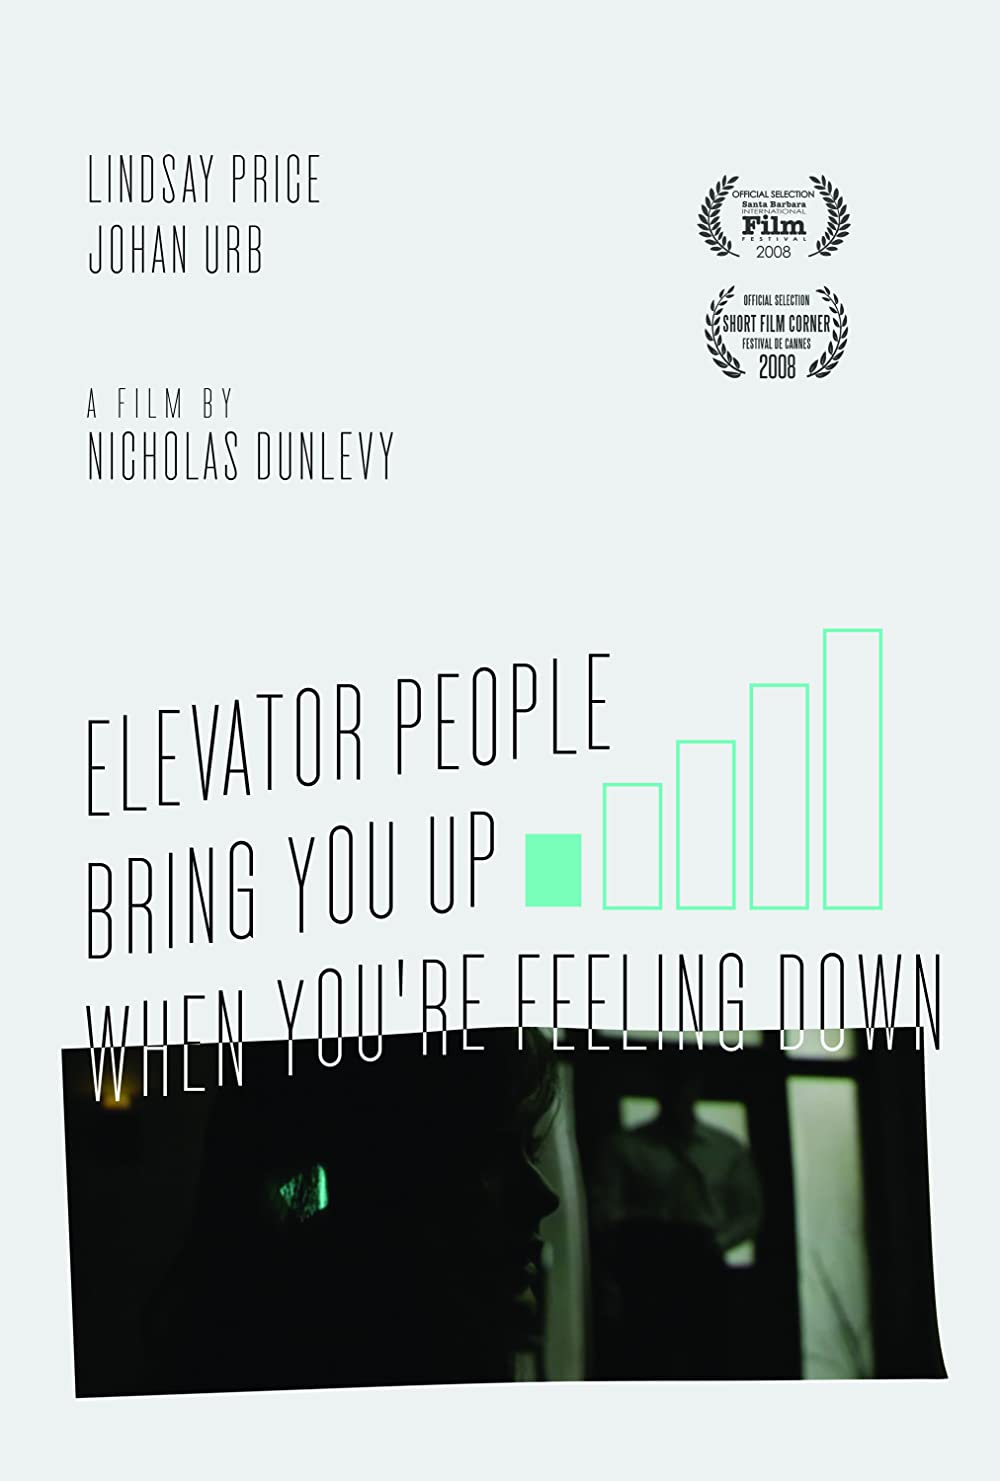 Download Elevator People Bring You Up When You're Feeling Down Movie | Elevator People Bring You Up When You're Feeling Down